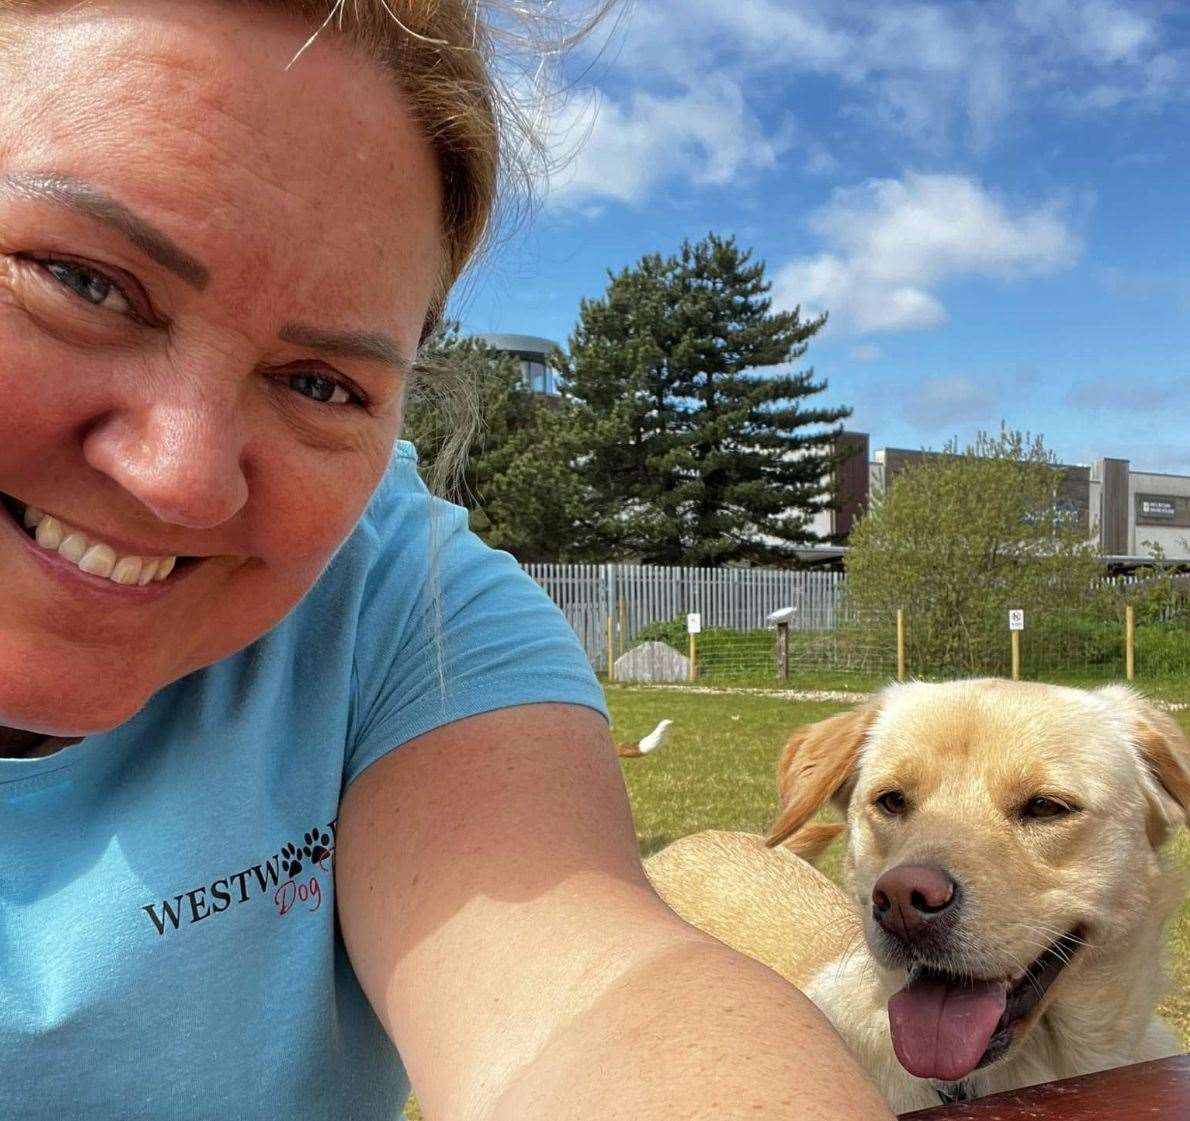 Maxine Hughes is hoping to open another dog park, in a new venue. Picture: Westwood Dog Park